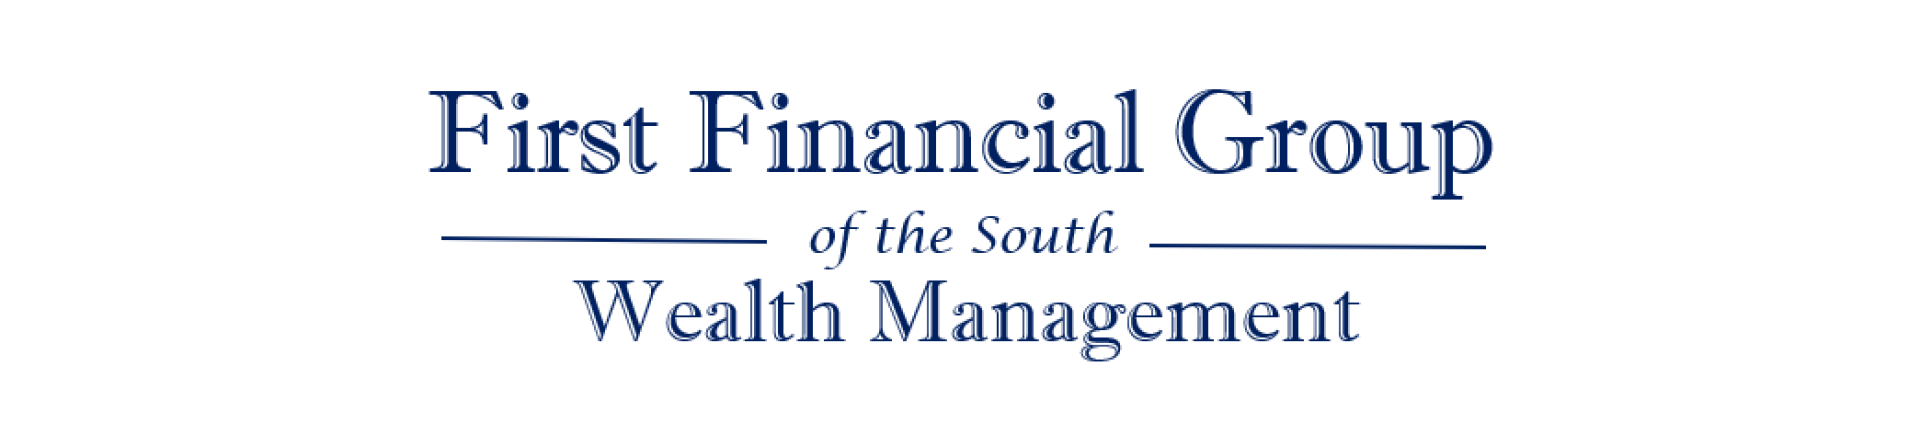           First Financial Group                  of the South                      Wealth Management